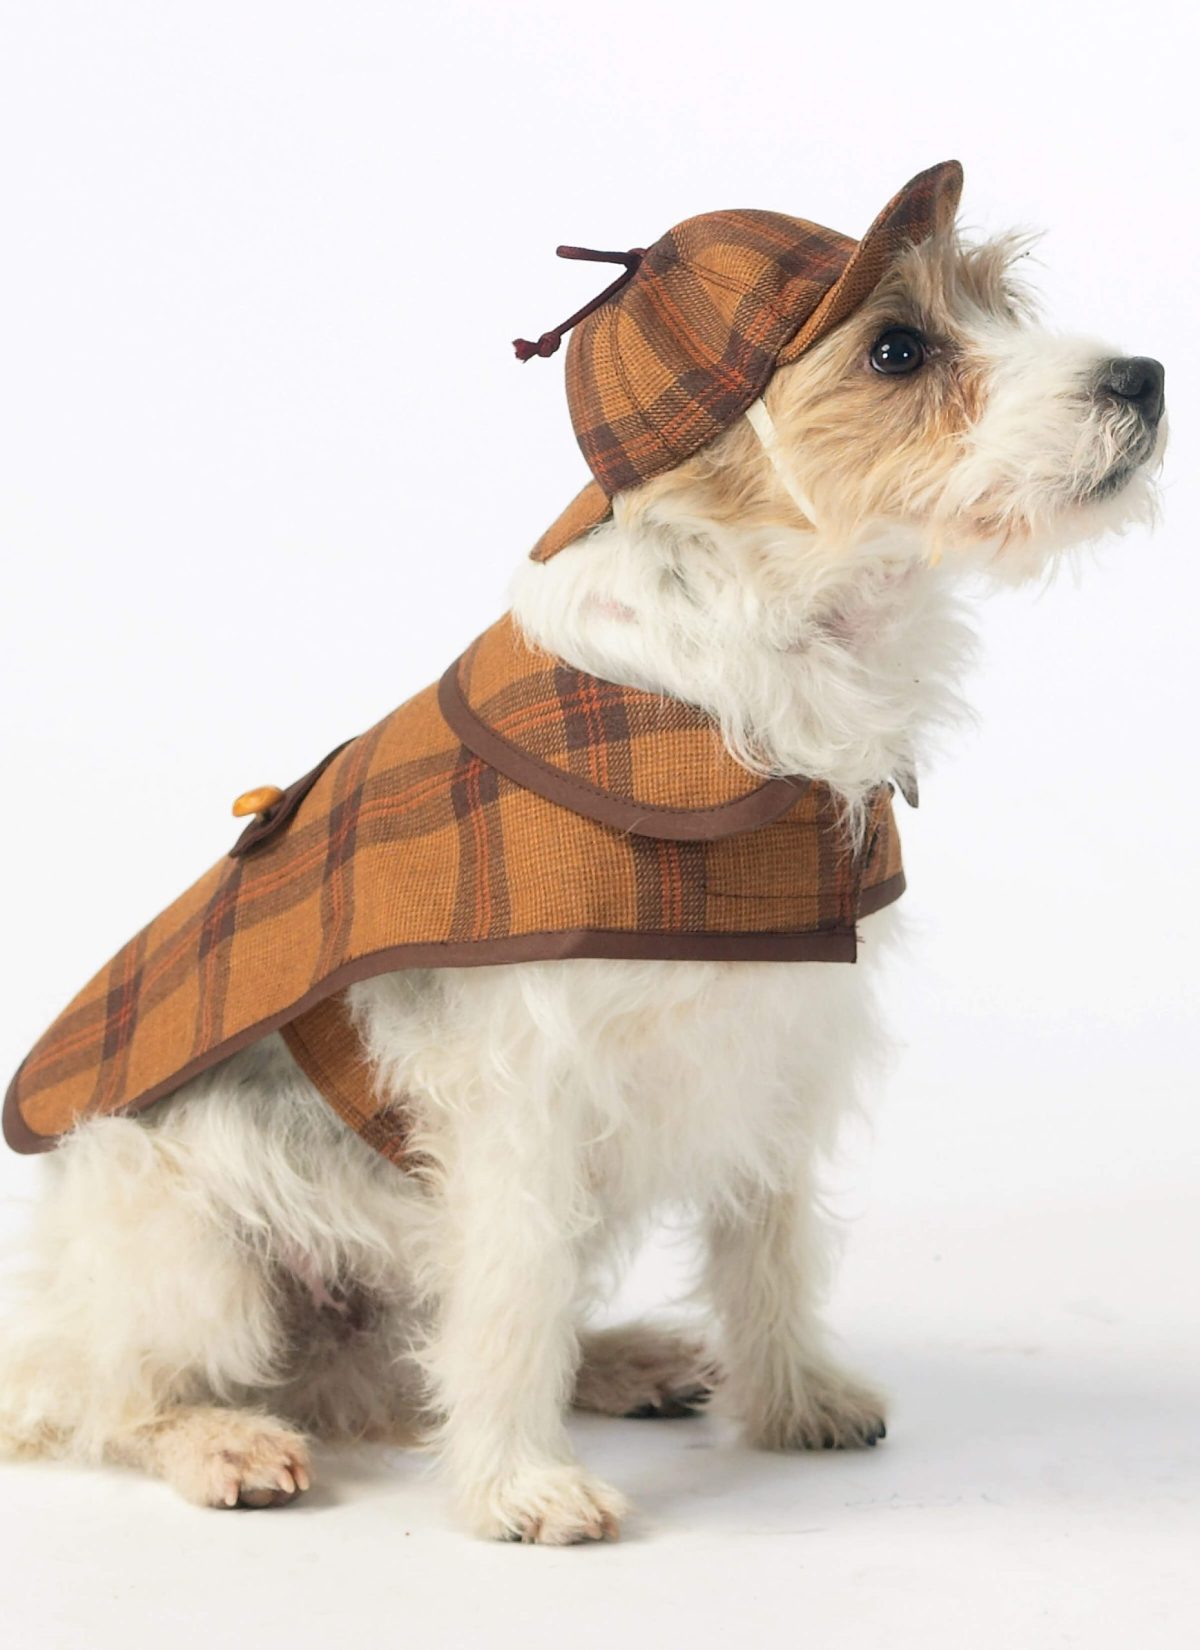 McCall's Sewing Pattern M7004 Pet Costumes